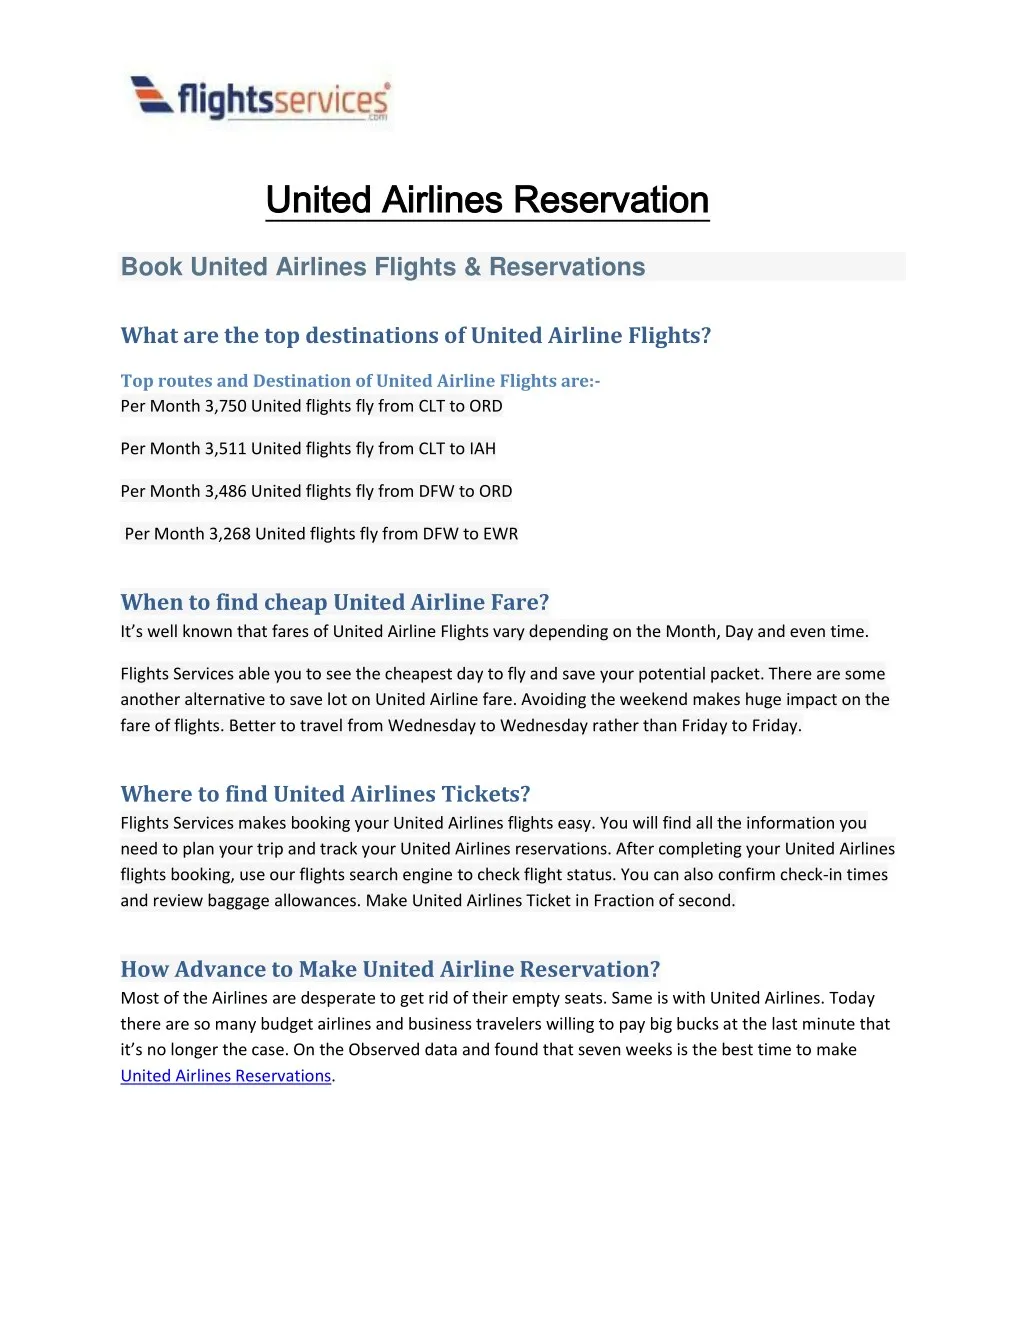 united airlines reservation united airlines